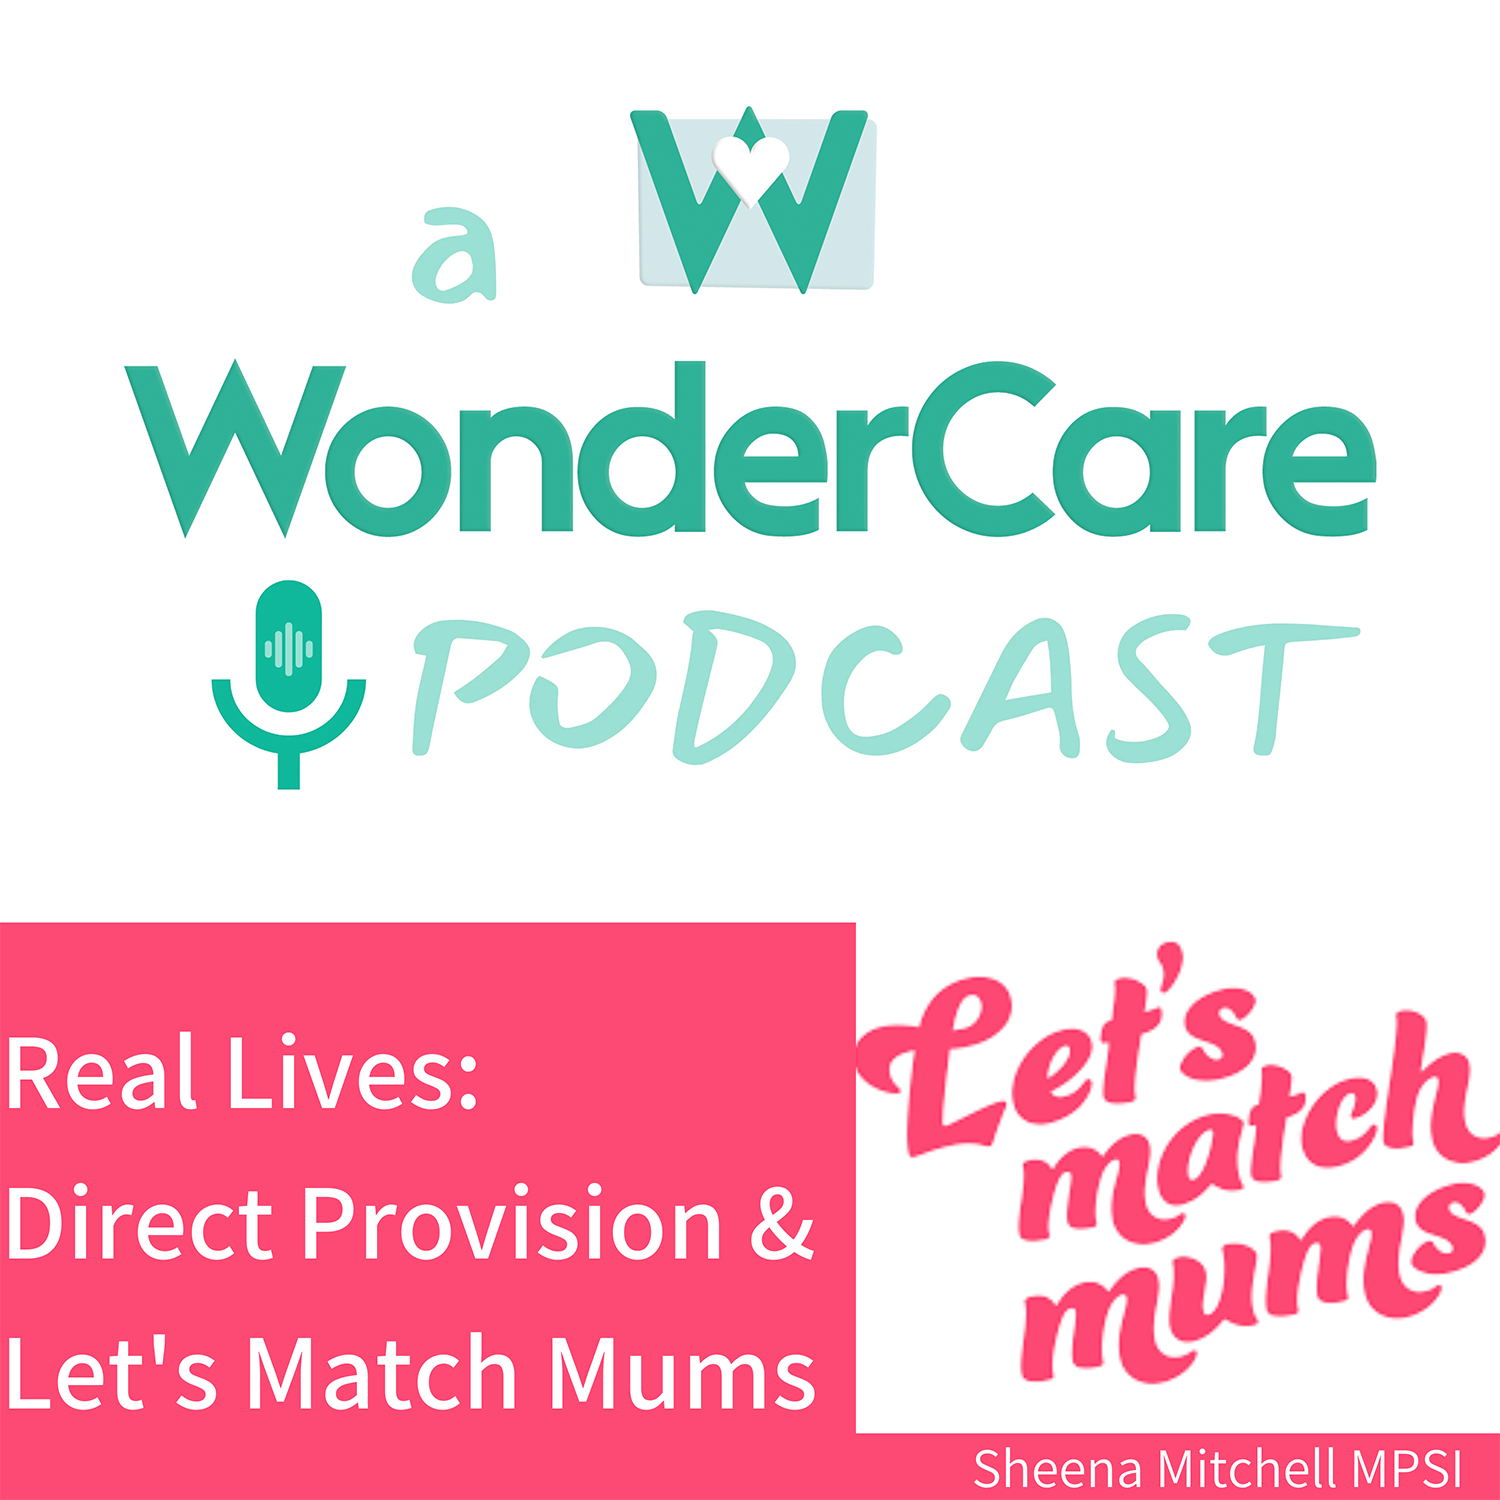 Real Lives: Direct Provision & Lets Match Mums